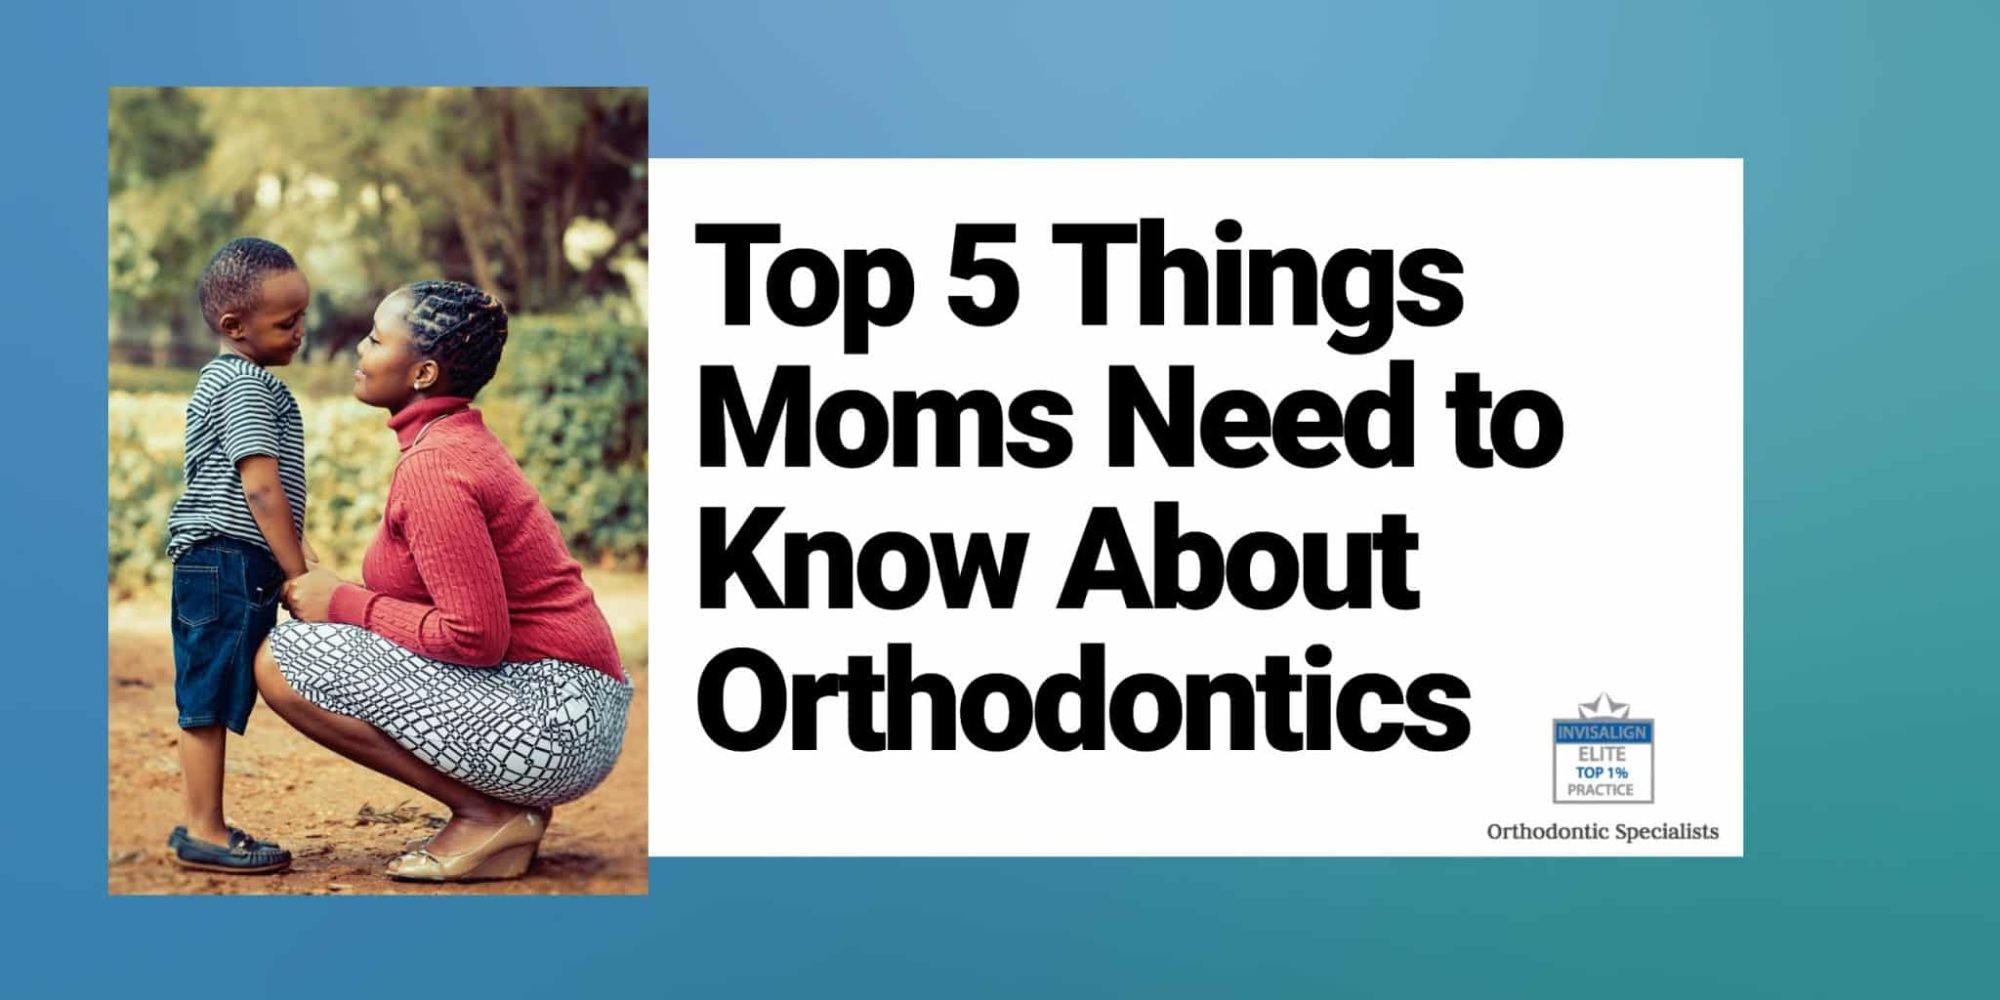 Top 5 Things Moms Need to Know About Orthodontics